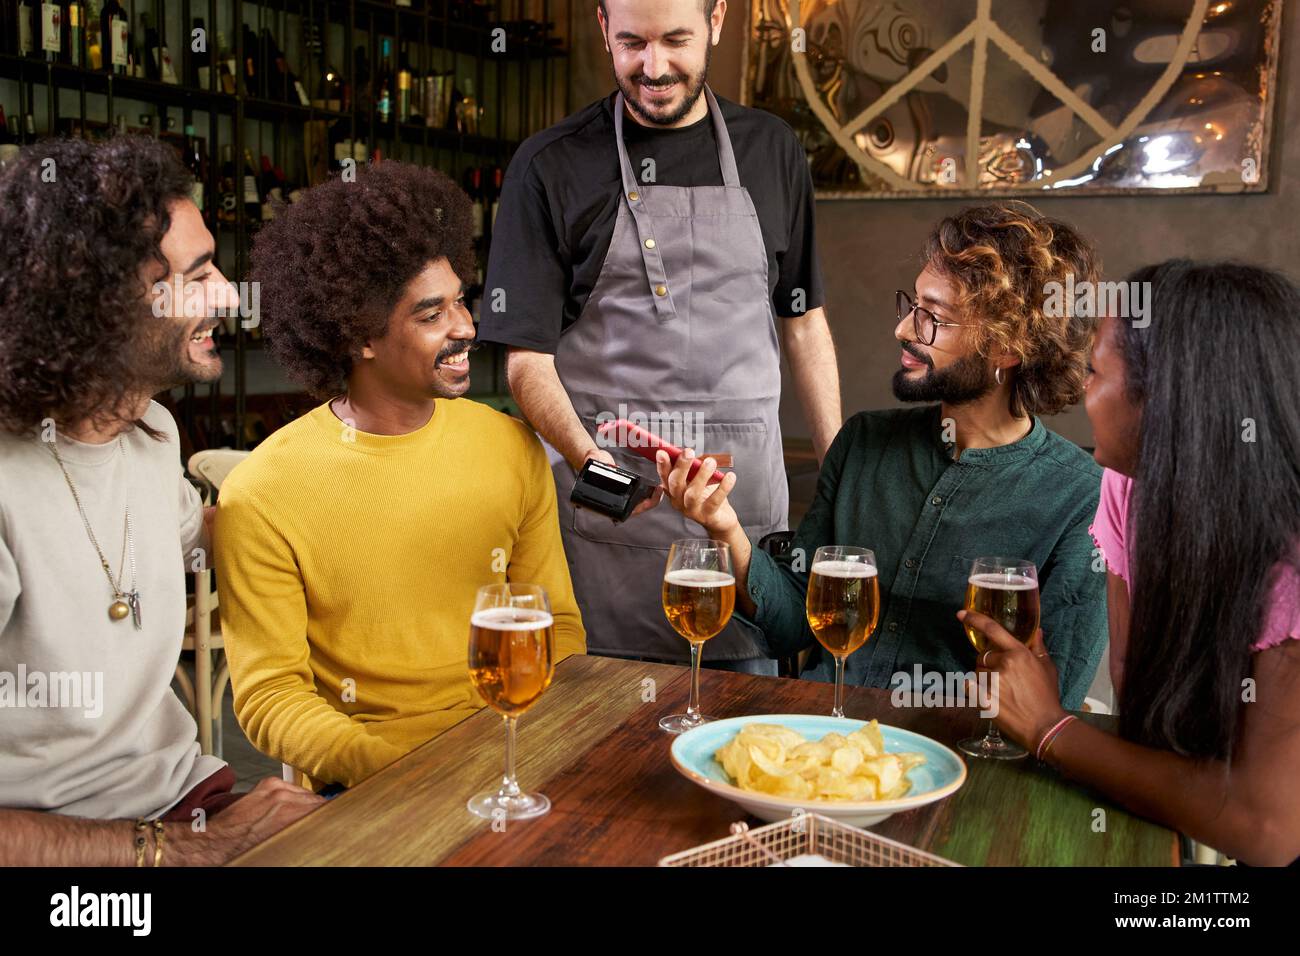 Customer making wireless or contactless payment using smartphone in a bar Stock Photo